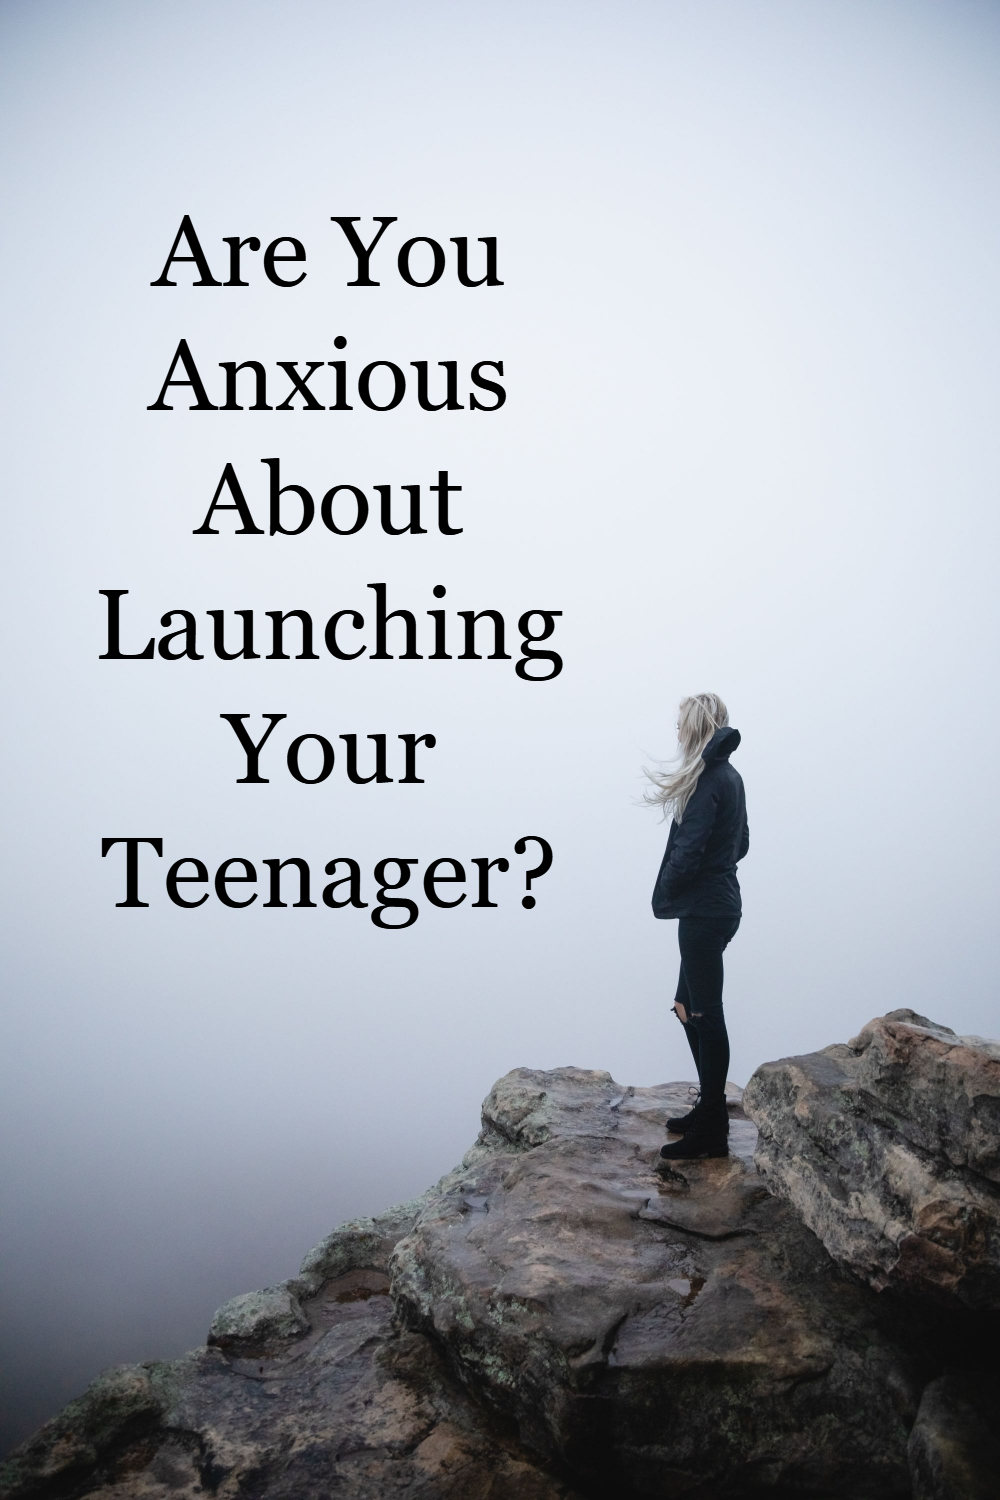 Are You Anxious About Launching Your Teenager?